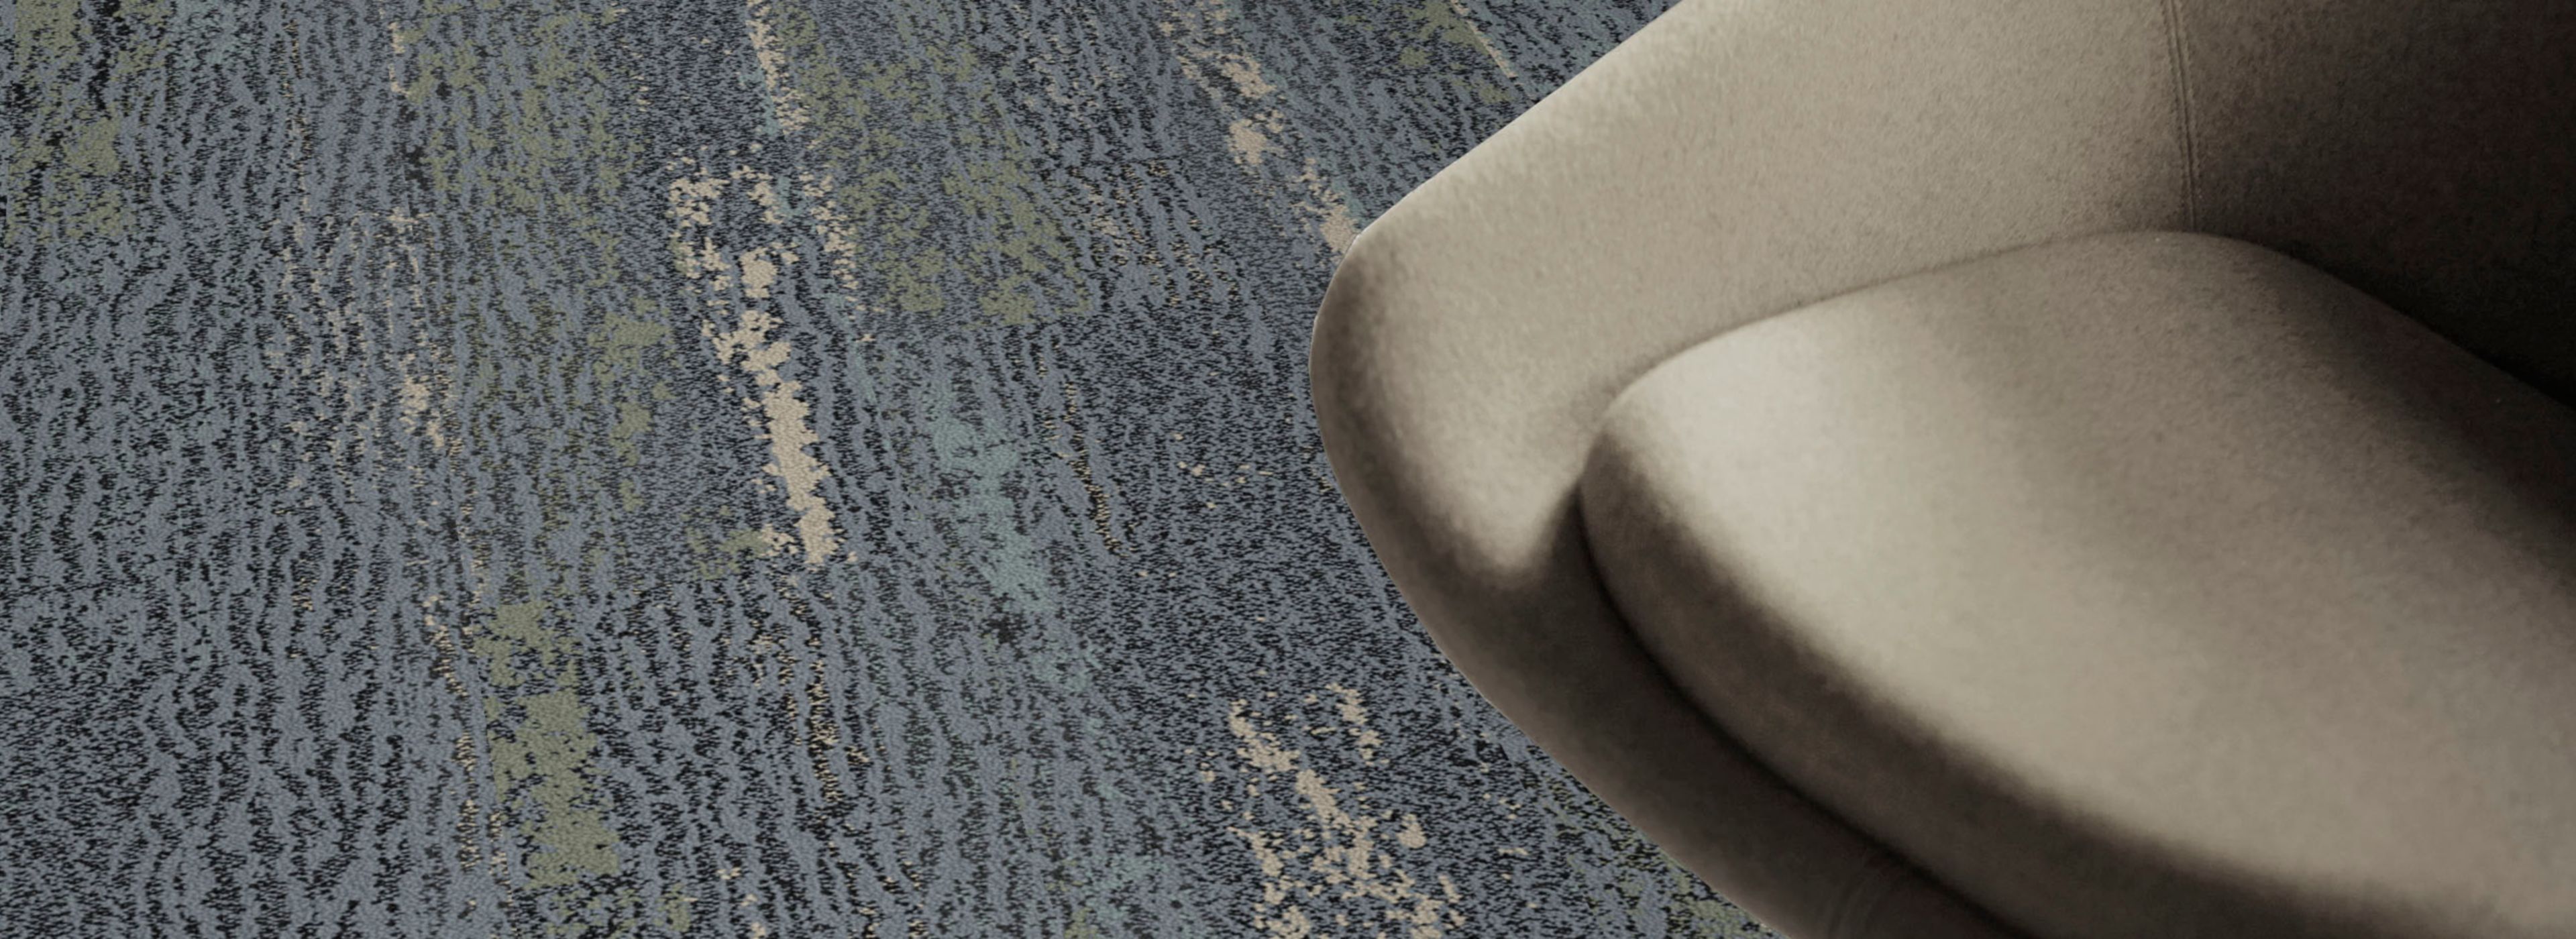 Detail of Interface Uprooted plank carpet tile with chair numéro d’image 1